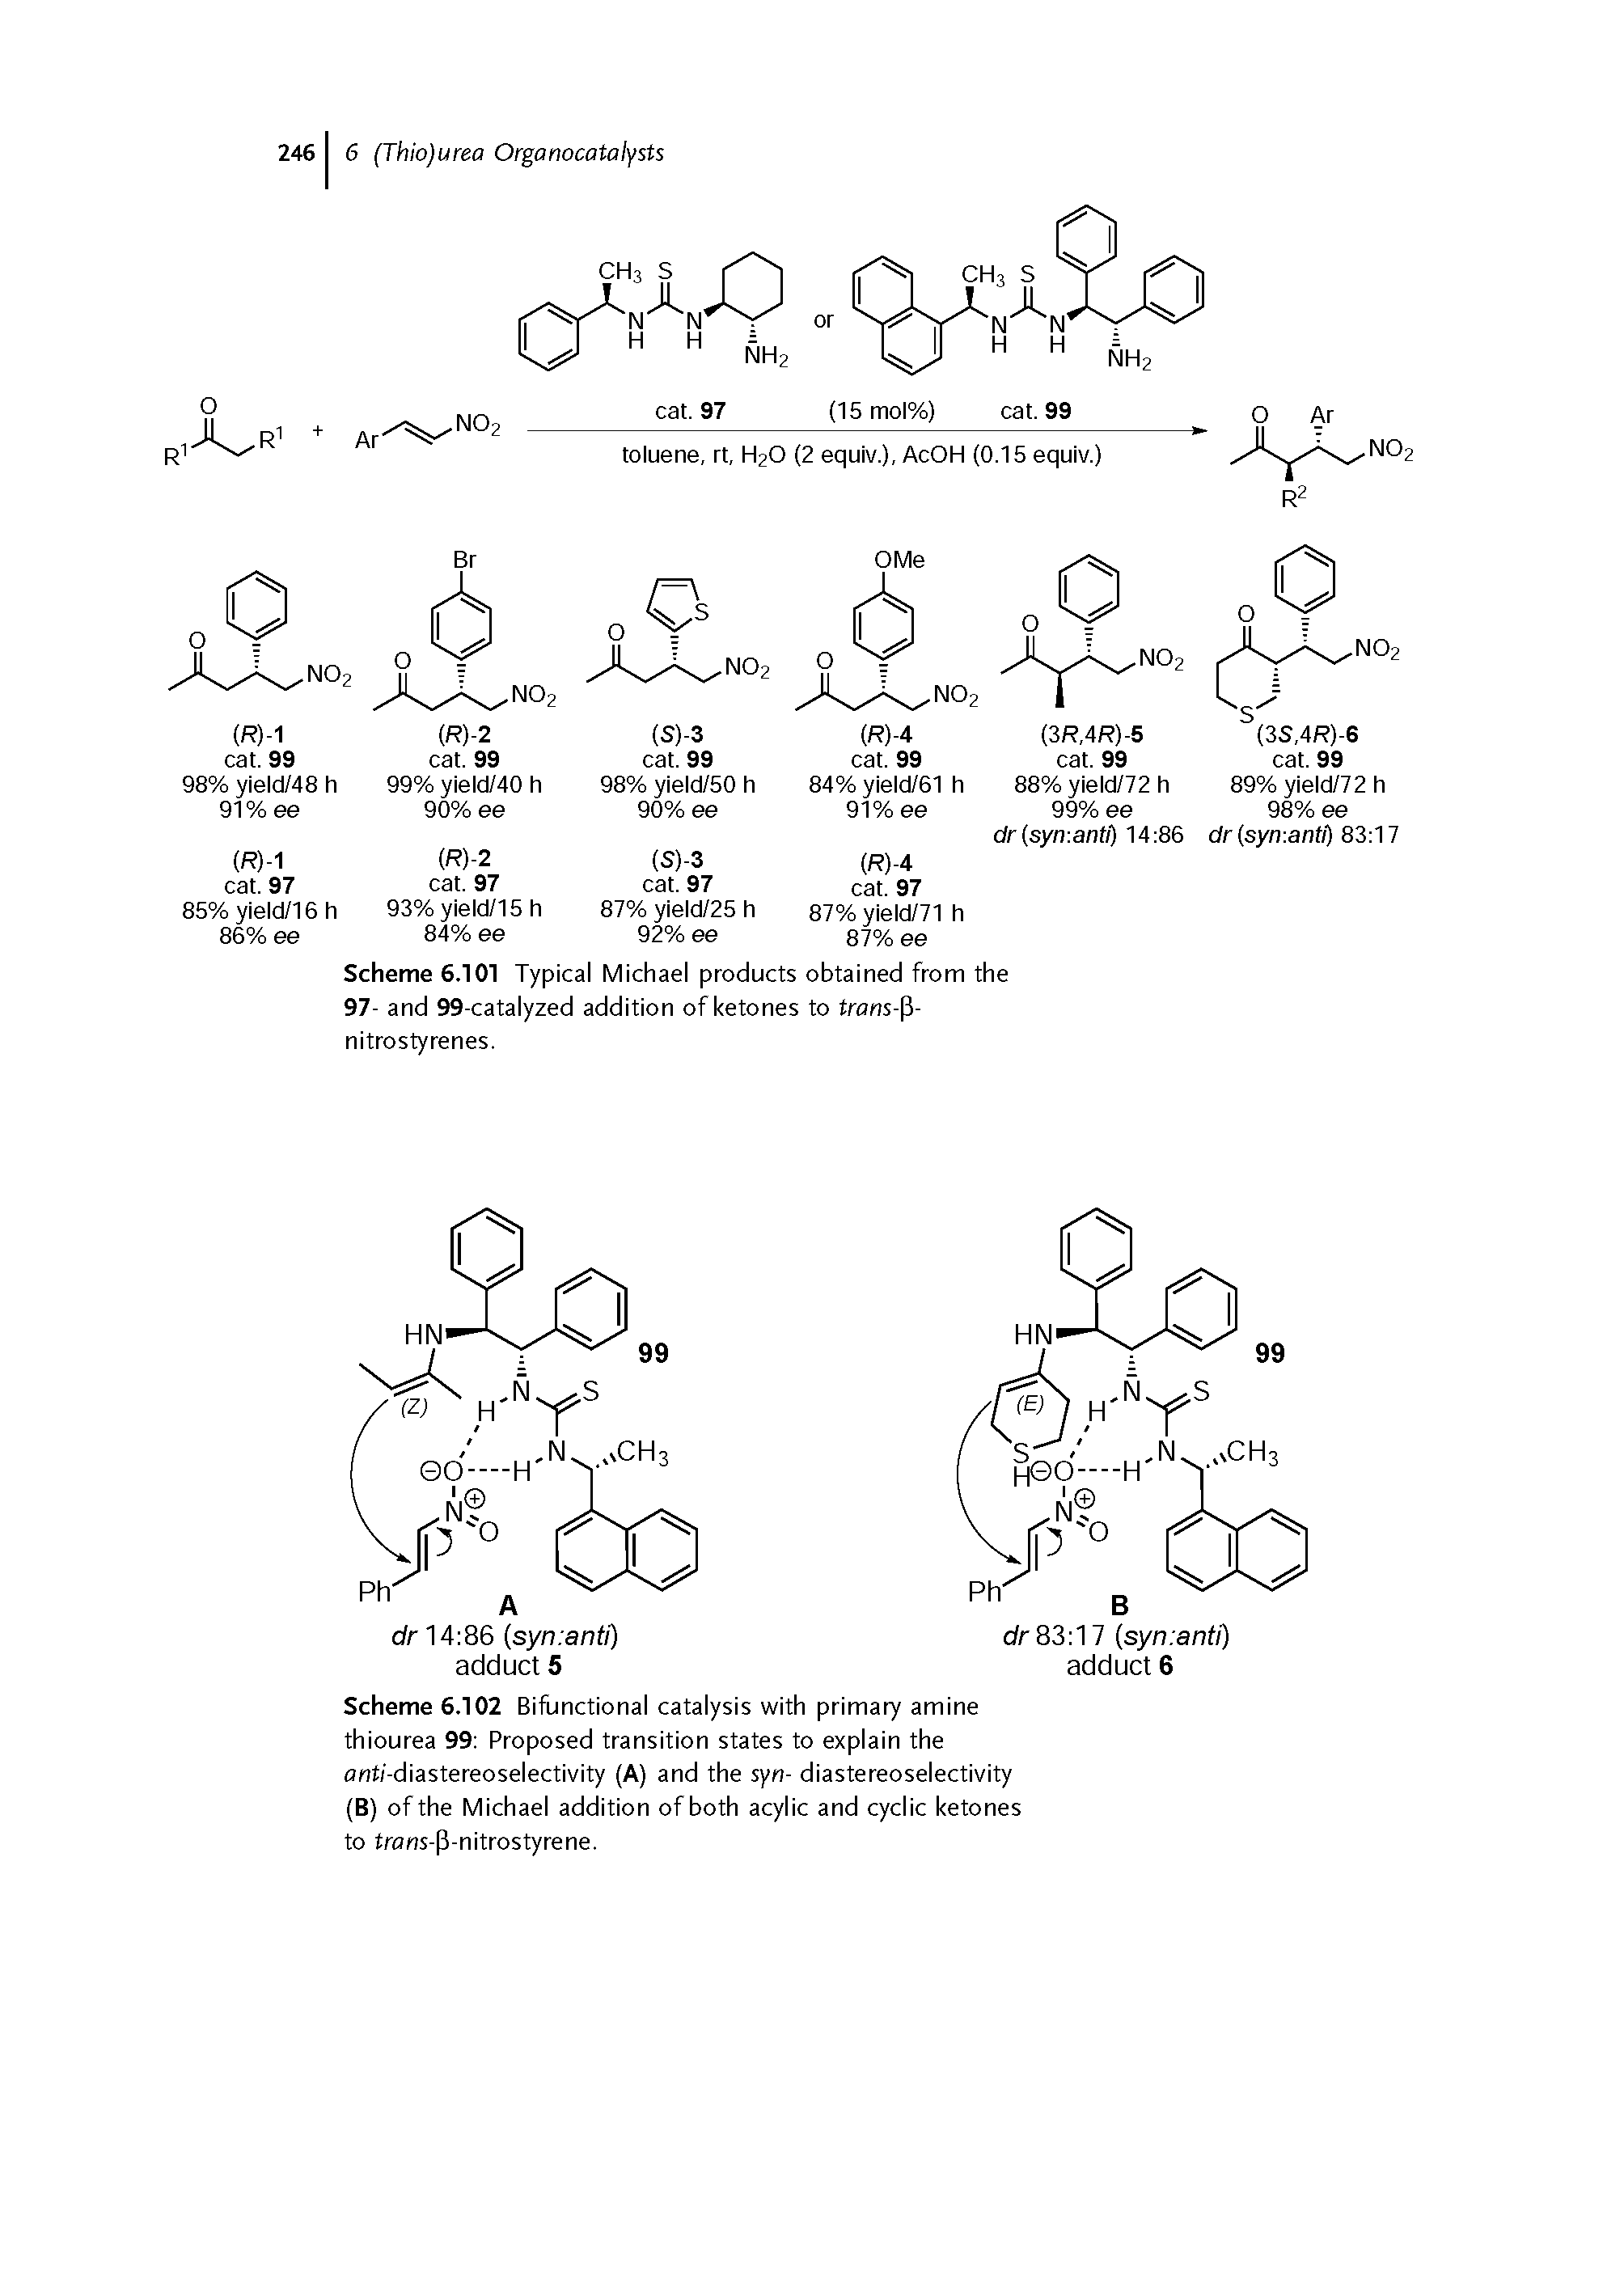 Scheme 6.102 Bifunctional catalysis with primary amine thiourea 99 Proposed transition states to explain the onfi-diastereoselectivity (A) and the syn- diastereoselectivity (B) of the Michael addition of both acylic and cyclic ketones to frans-P-nitrostyrene.